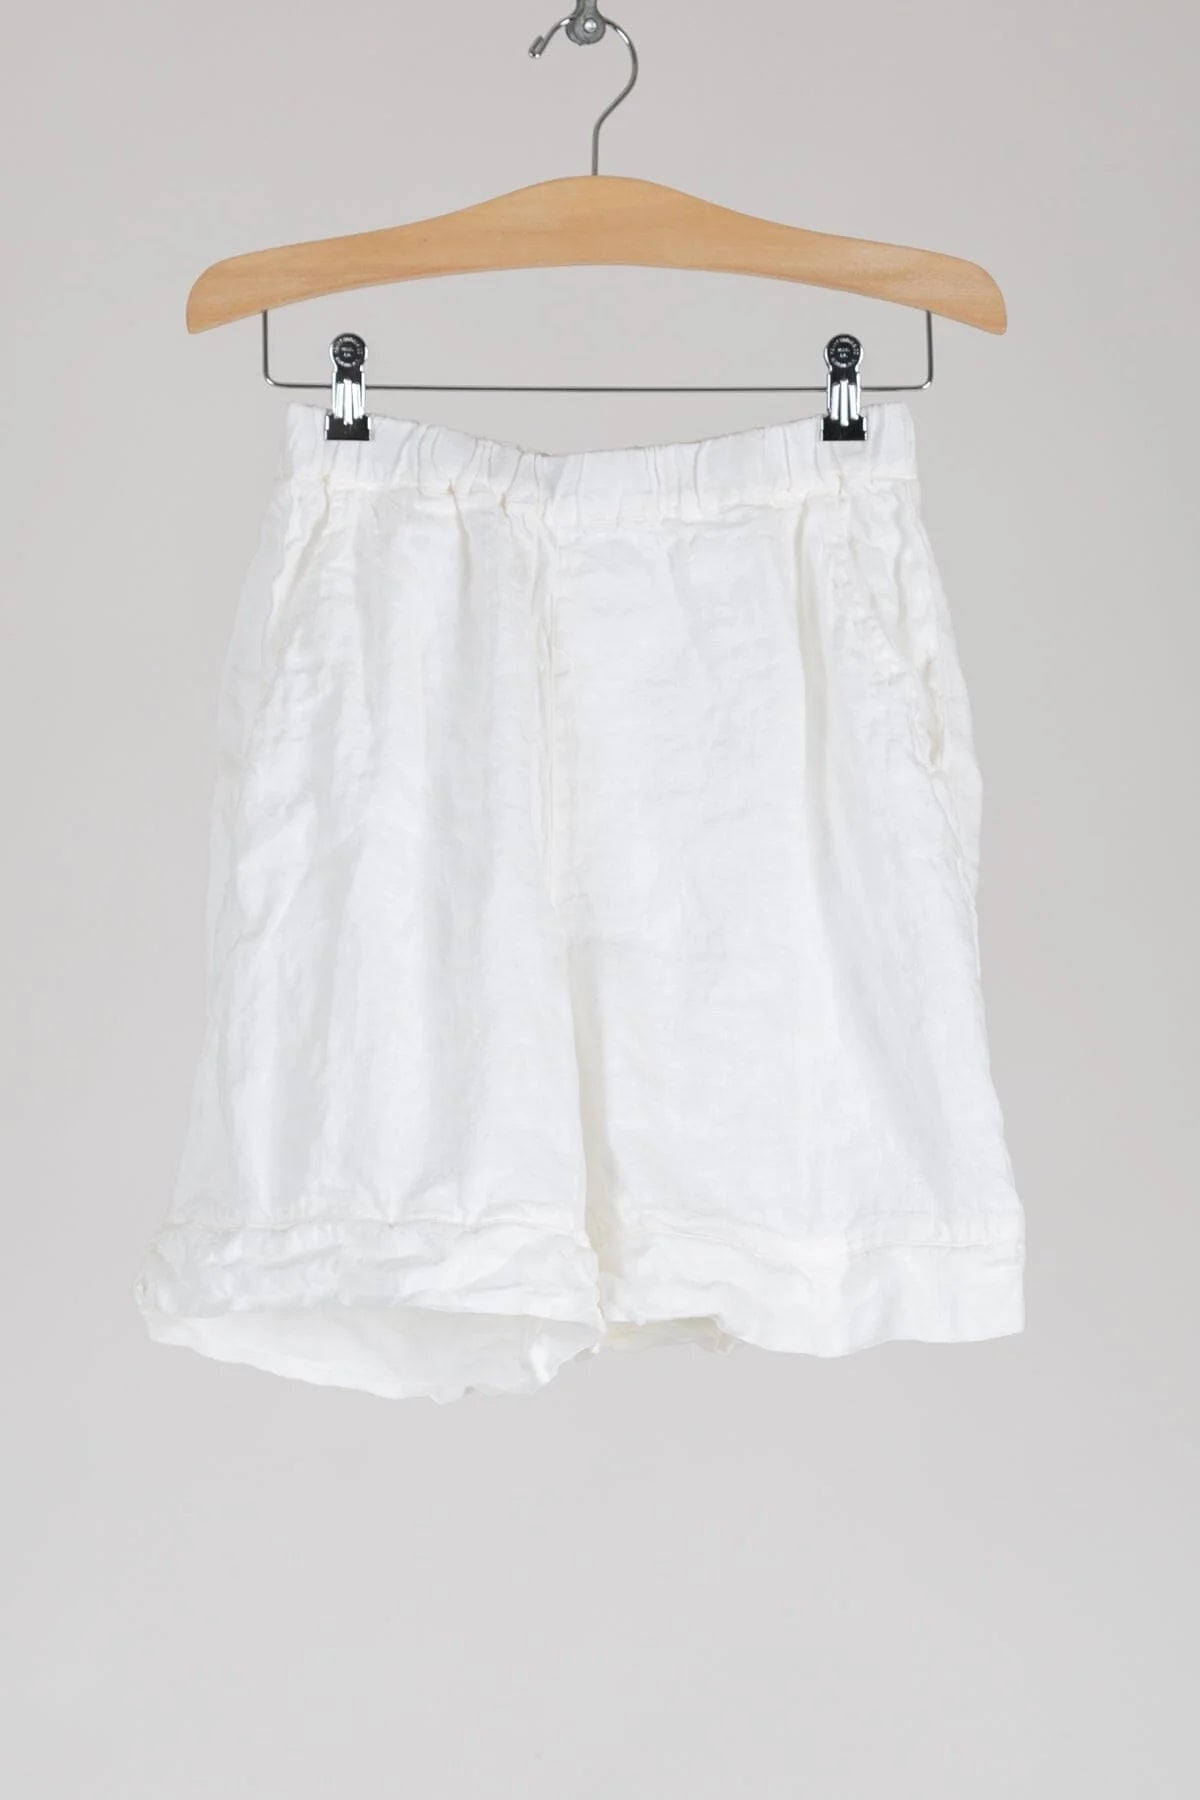 CP Shades - Piper Shorts in White/Black Linen